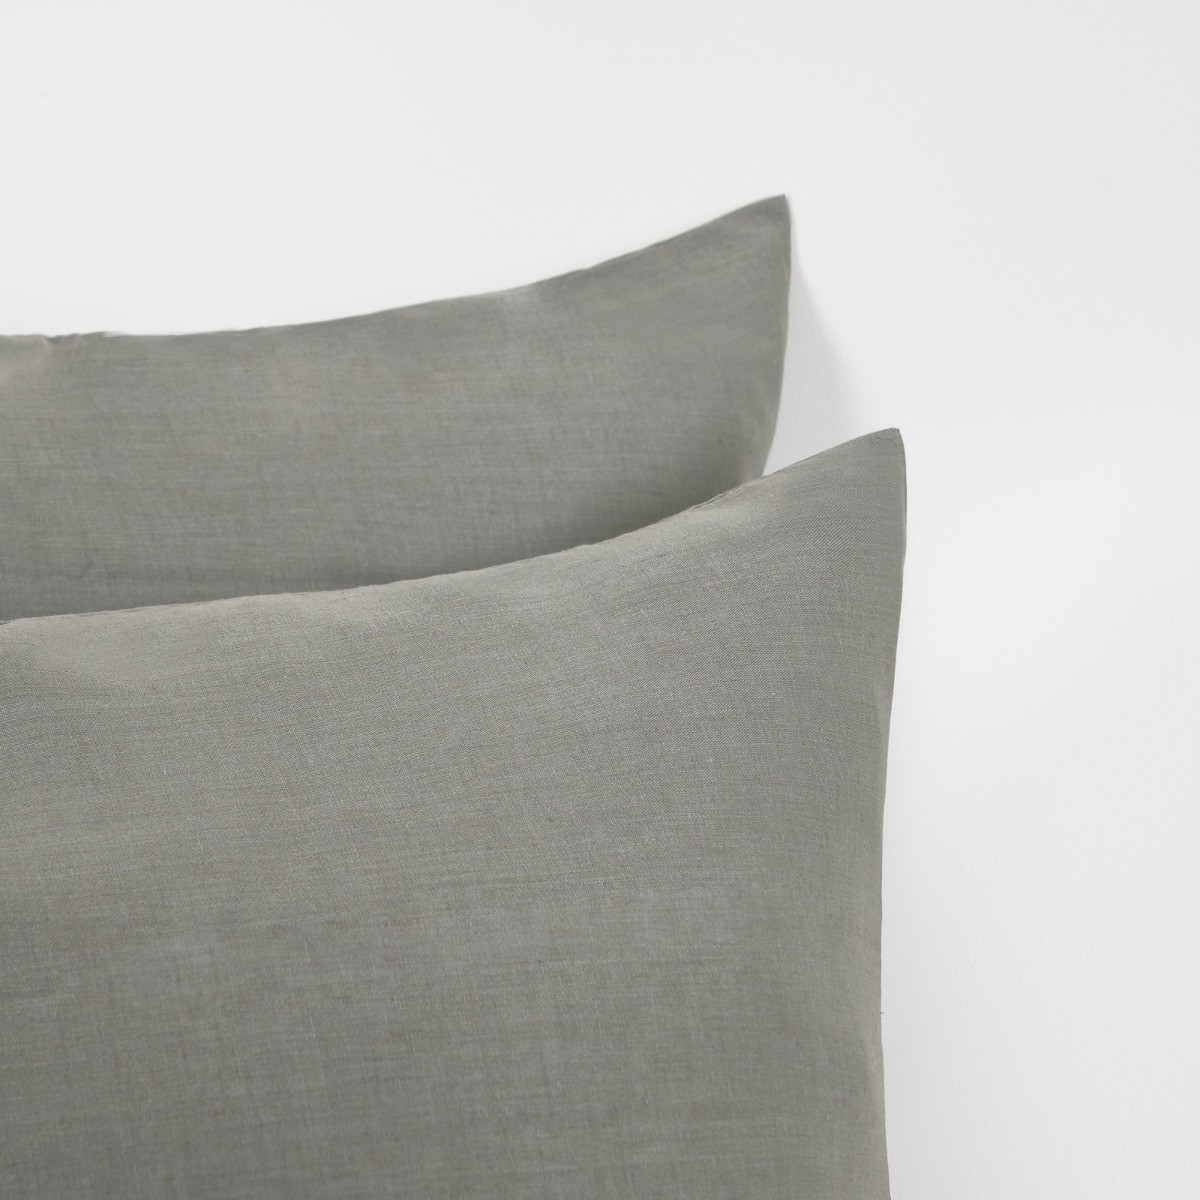 Highams 2 Pack Cotton Housewife Pillowcases - Grey>